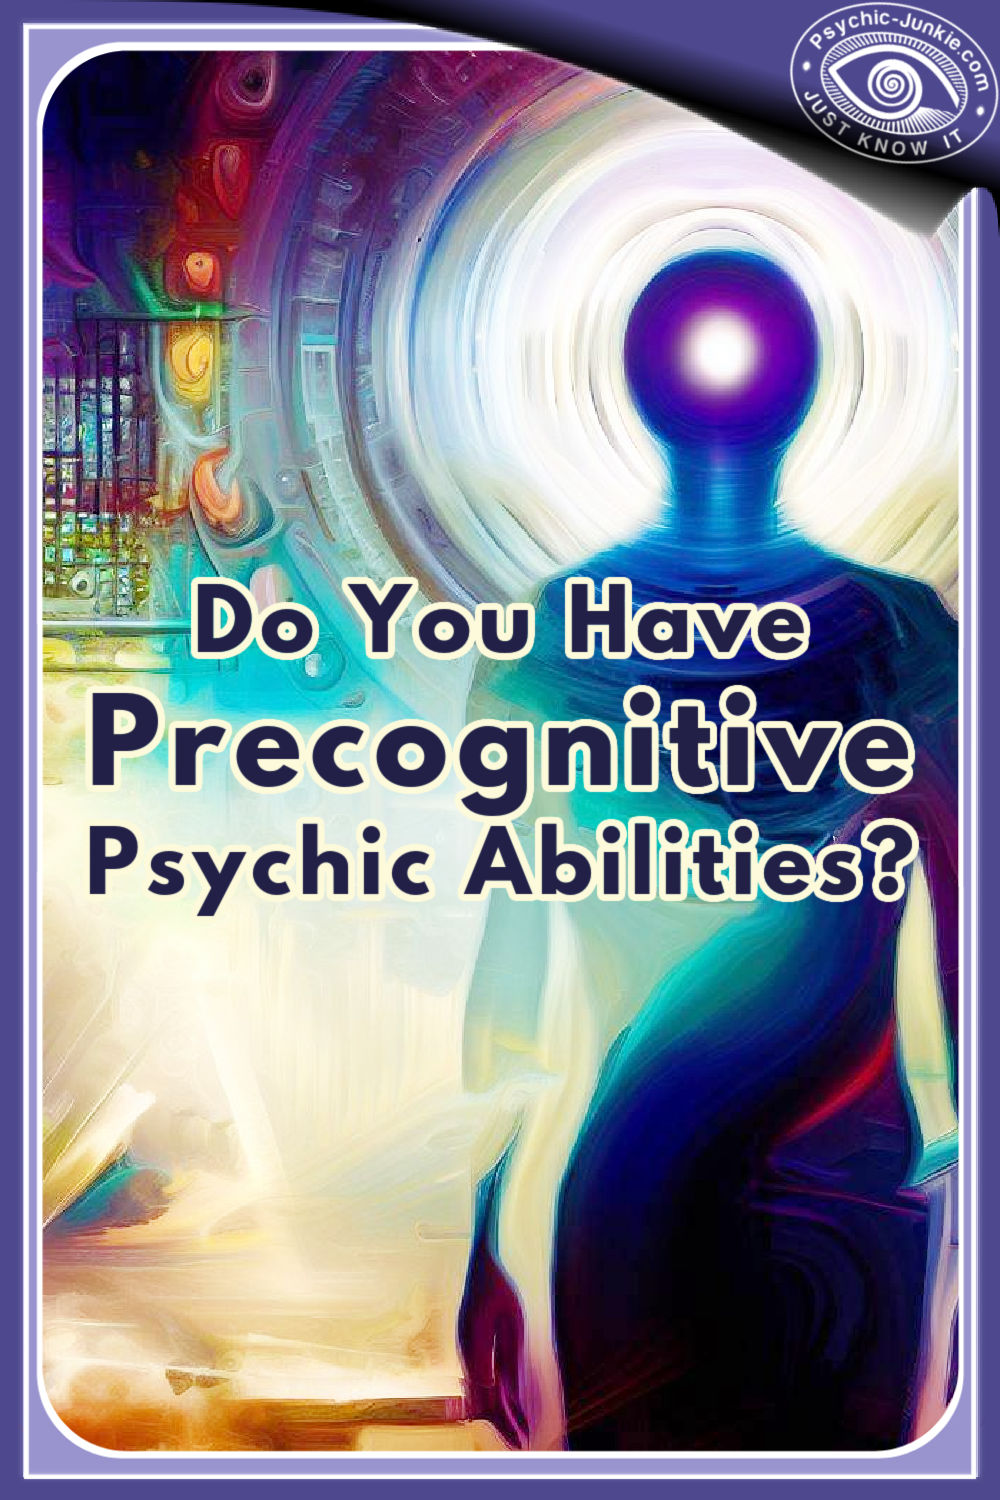 Do you have precognitive psychic abilities?